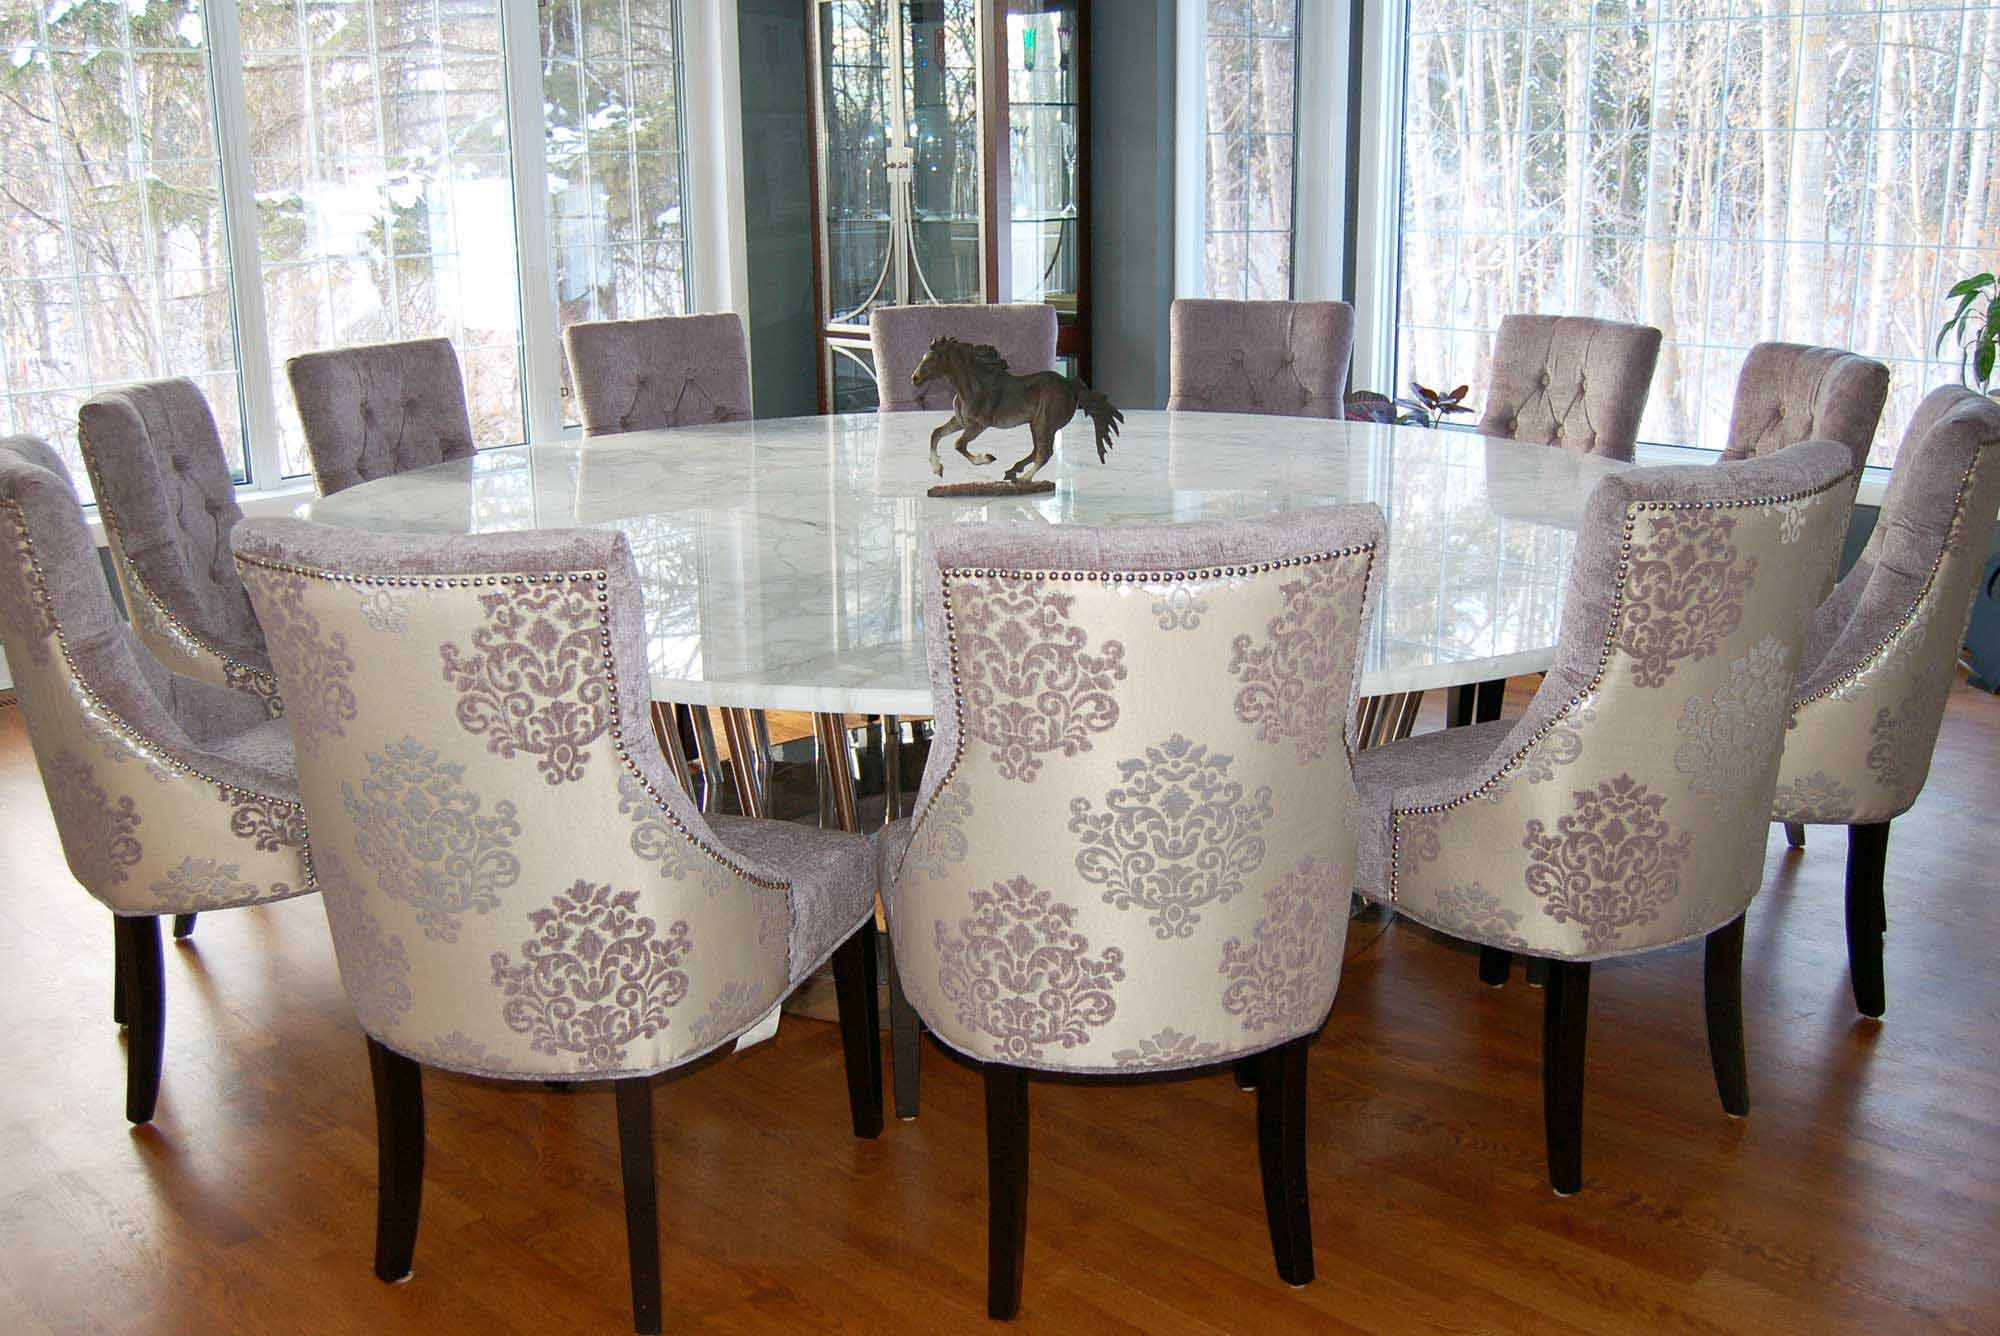 Dining Room Table For 12 People